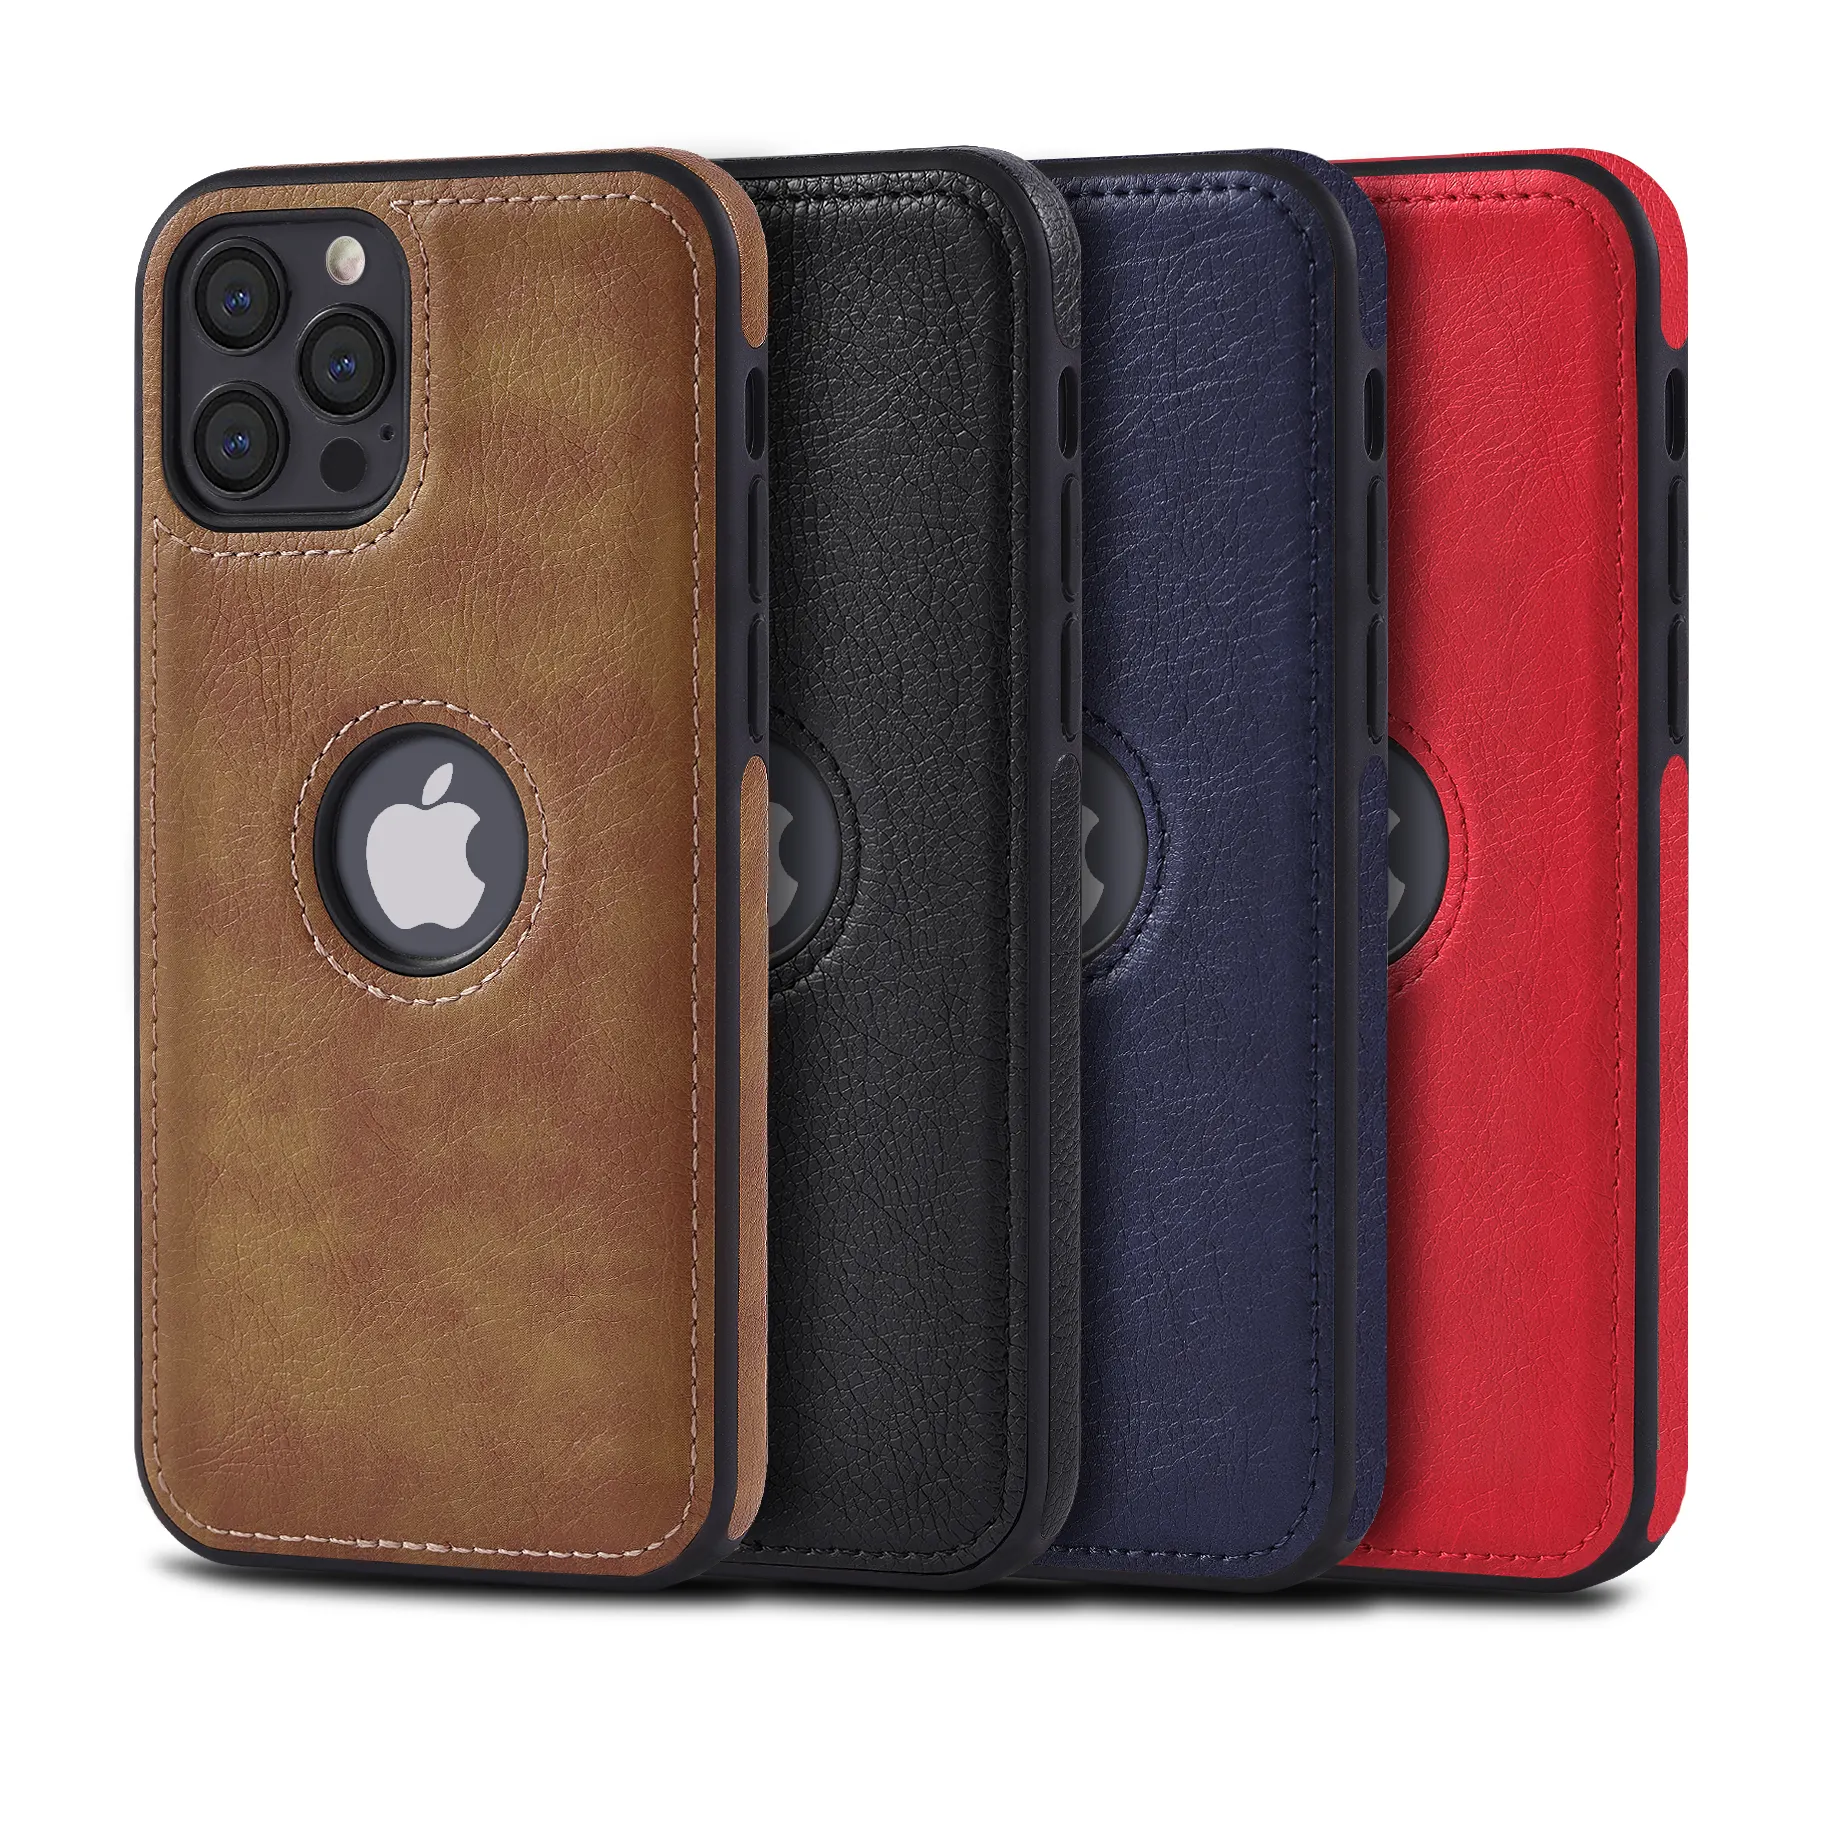 Leyi business shockproof anti fall TPU cover leather pu show logo luxury leather phone shell case for iphone 13 pro max mini